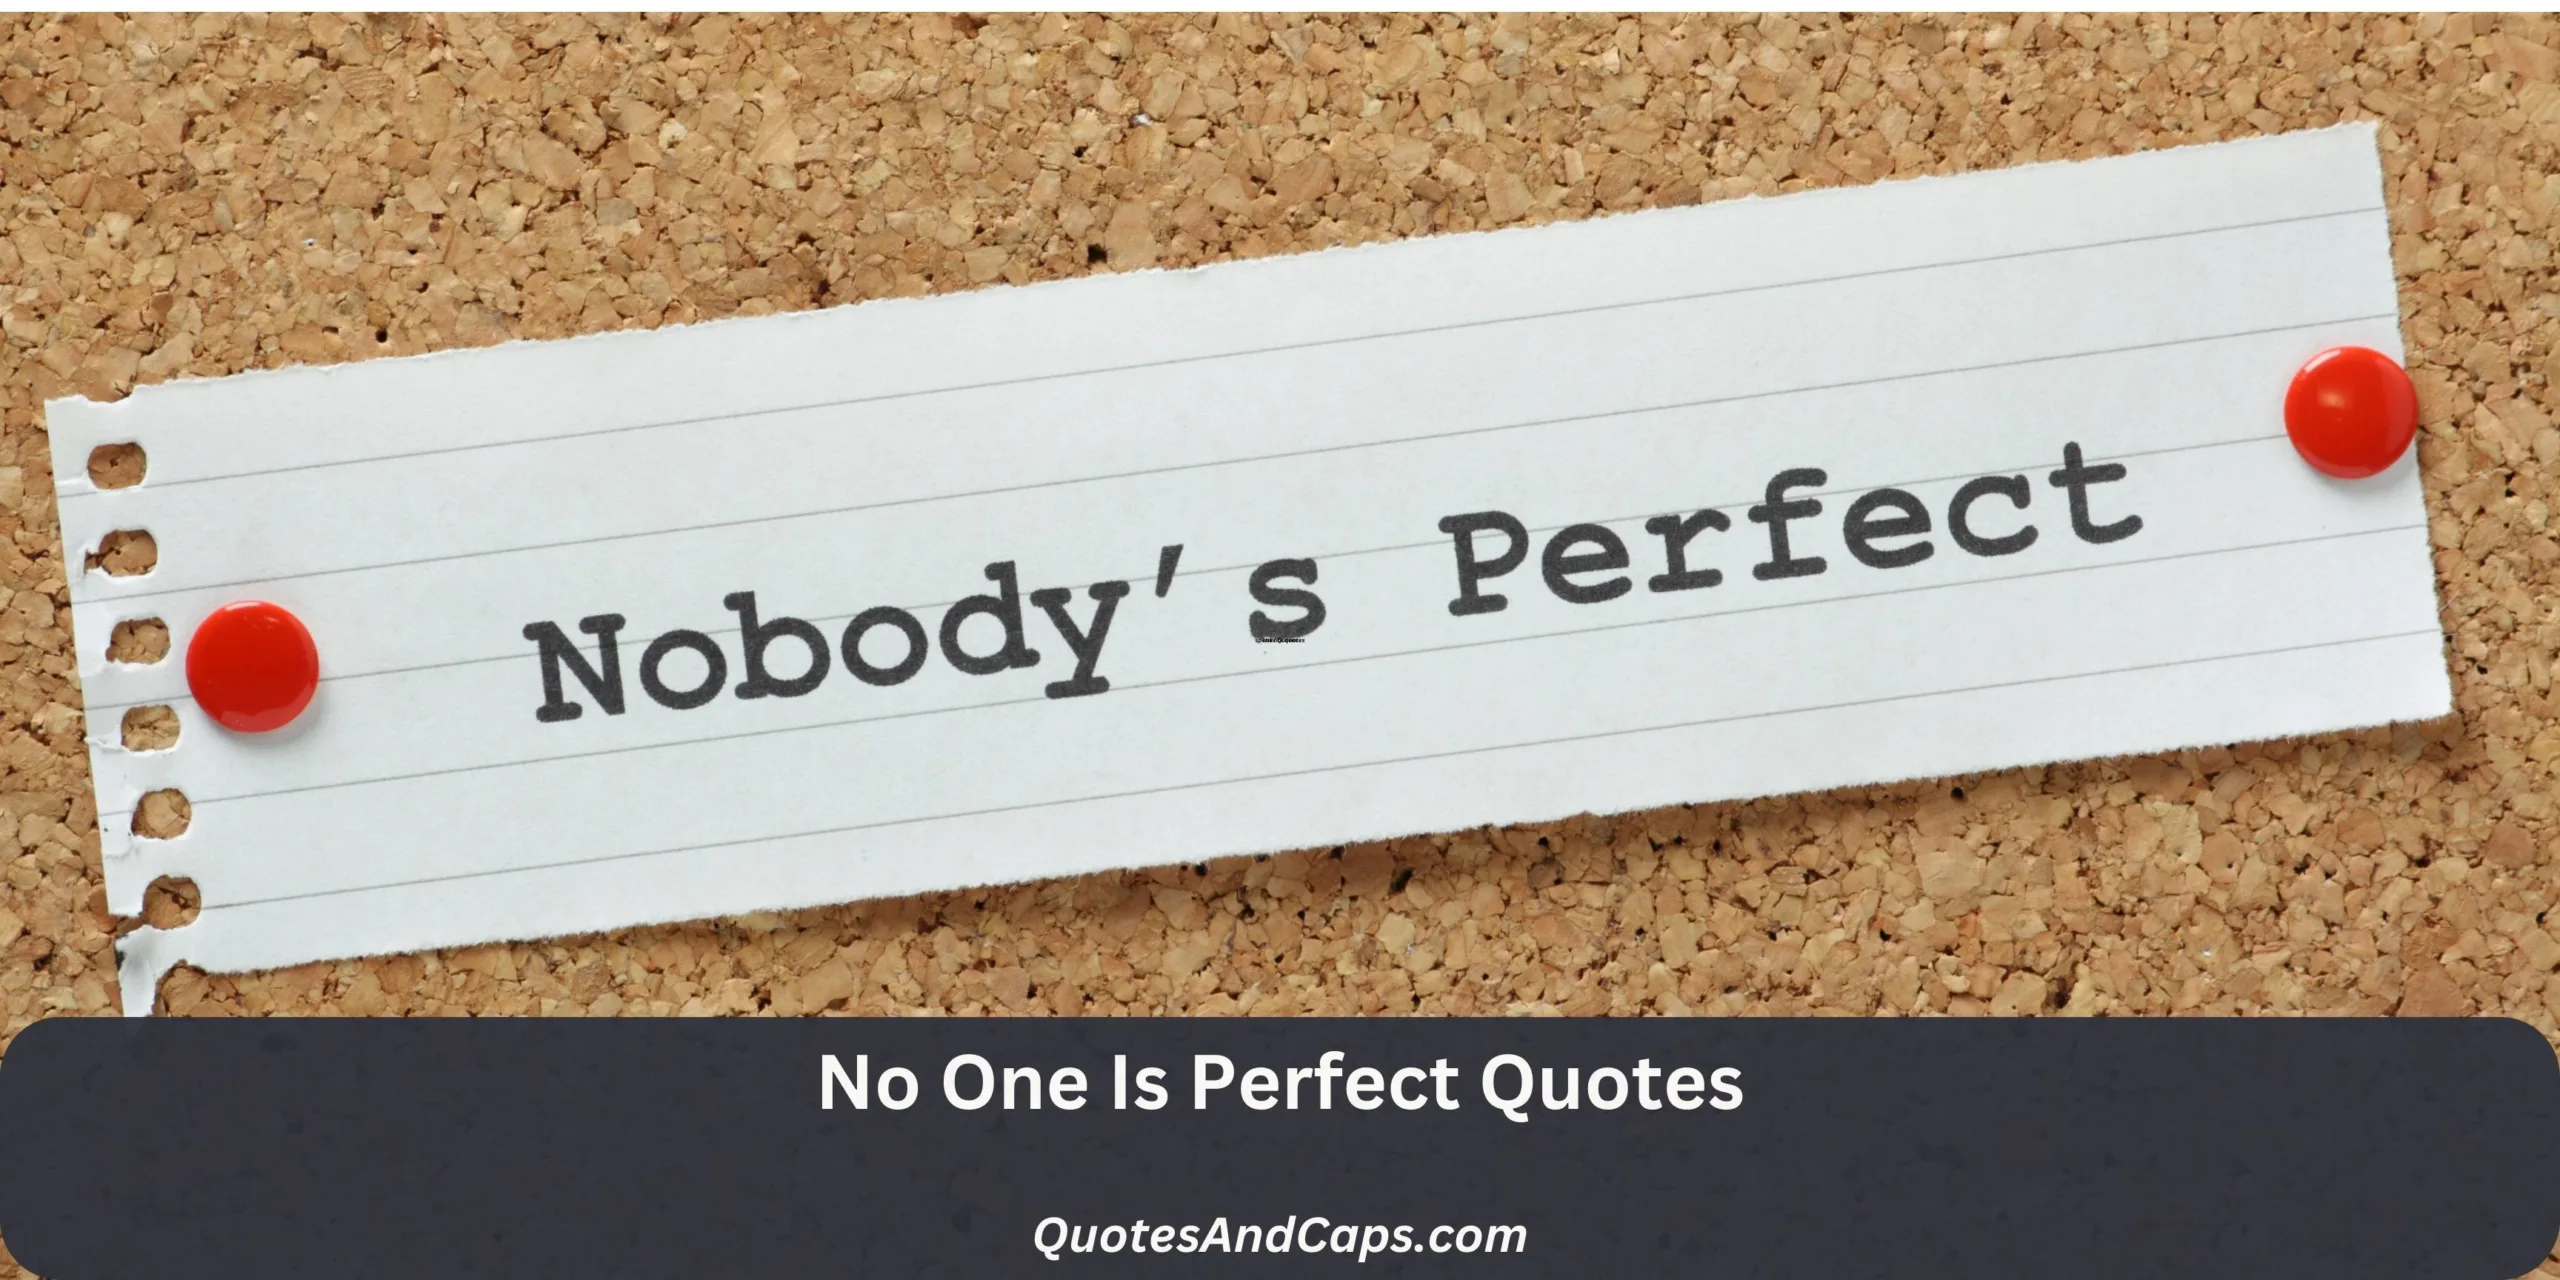 No One Is Perfect Quotes